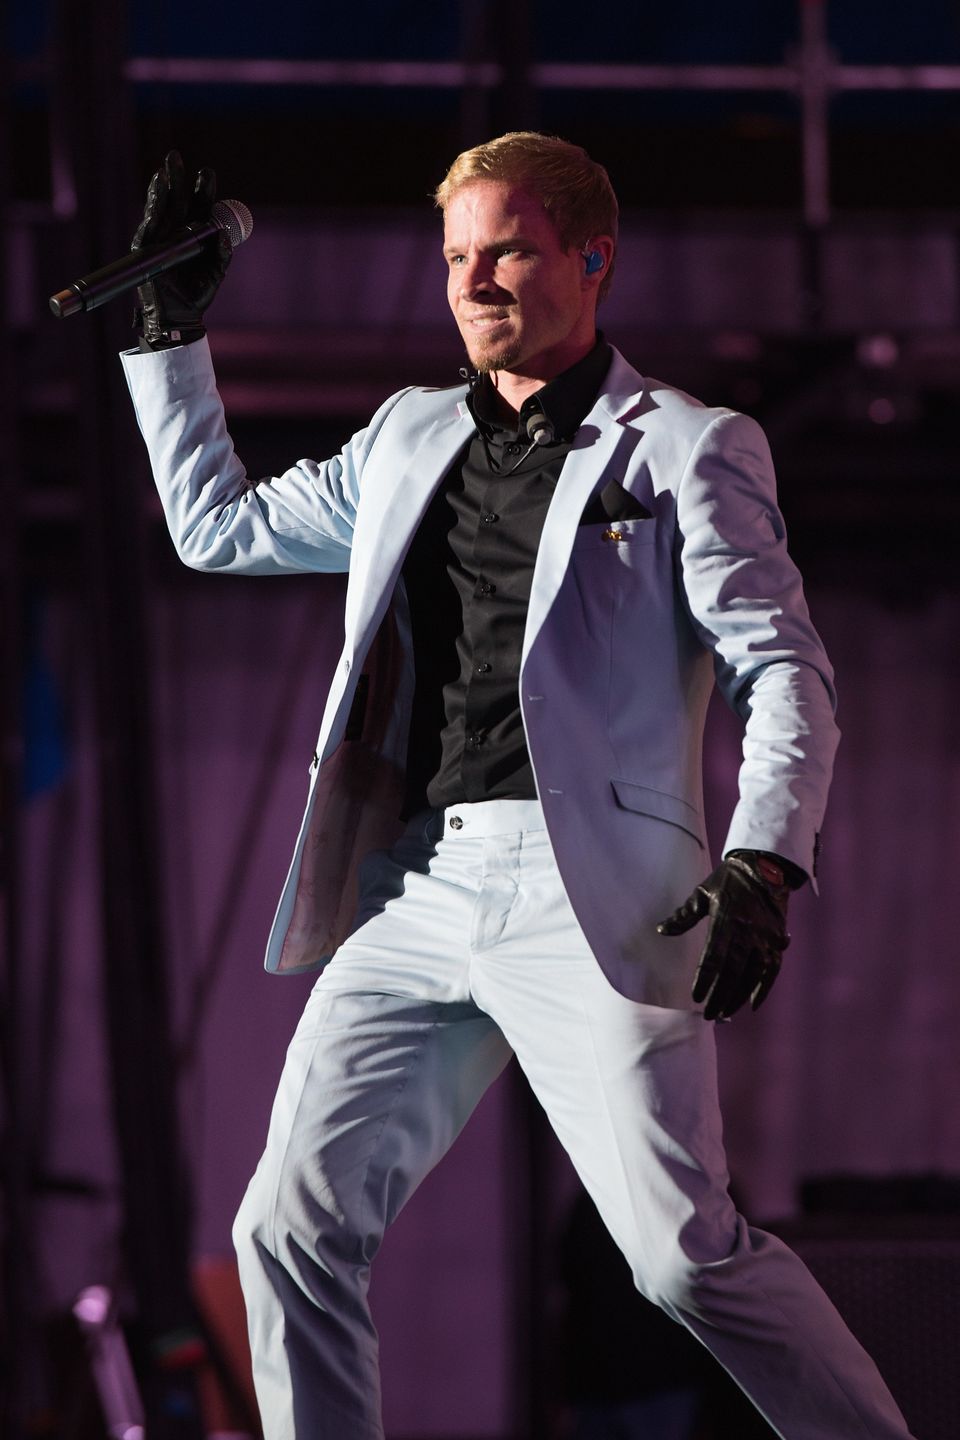 Backstreet Boys "In A World Like This" 2013 Tour - Opening Night